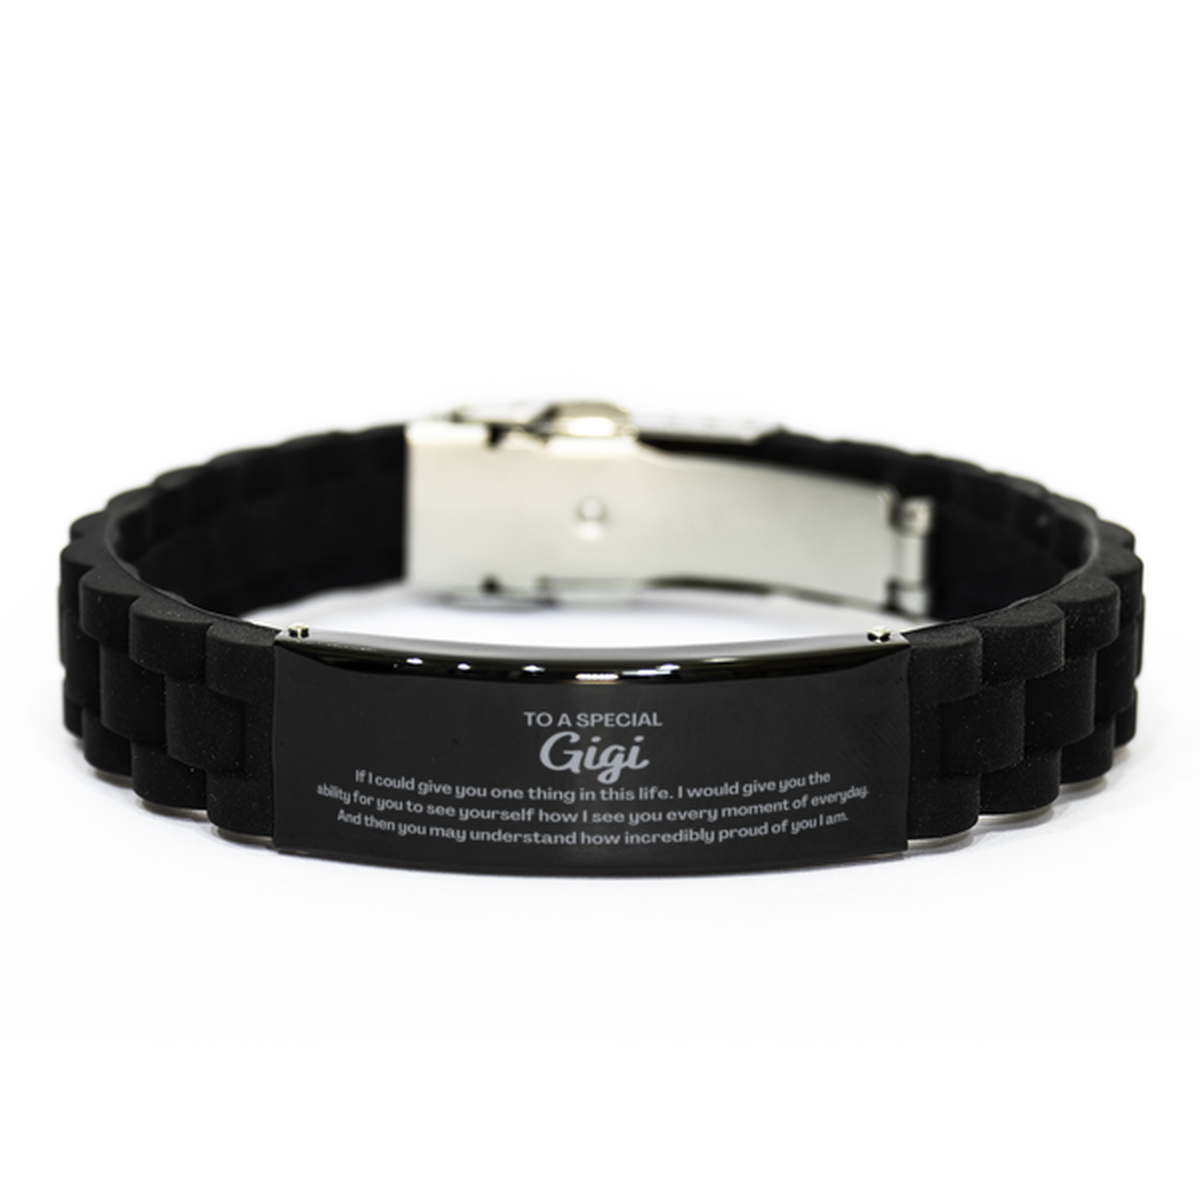 To My Gigi Black Glidelock Clasp Bracelet, Gifts For Gigi Engraved, Inspirational Gifts for Christmas Birthday, Epic Gifts for Gigi To A Special Gigi how incredibly proud of you I am